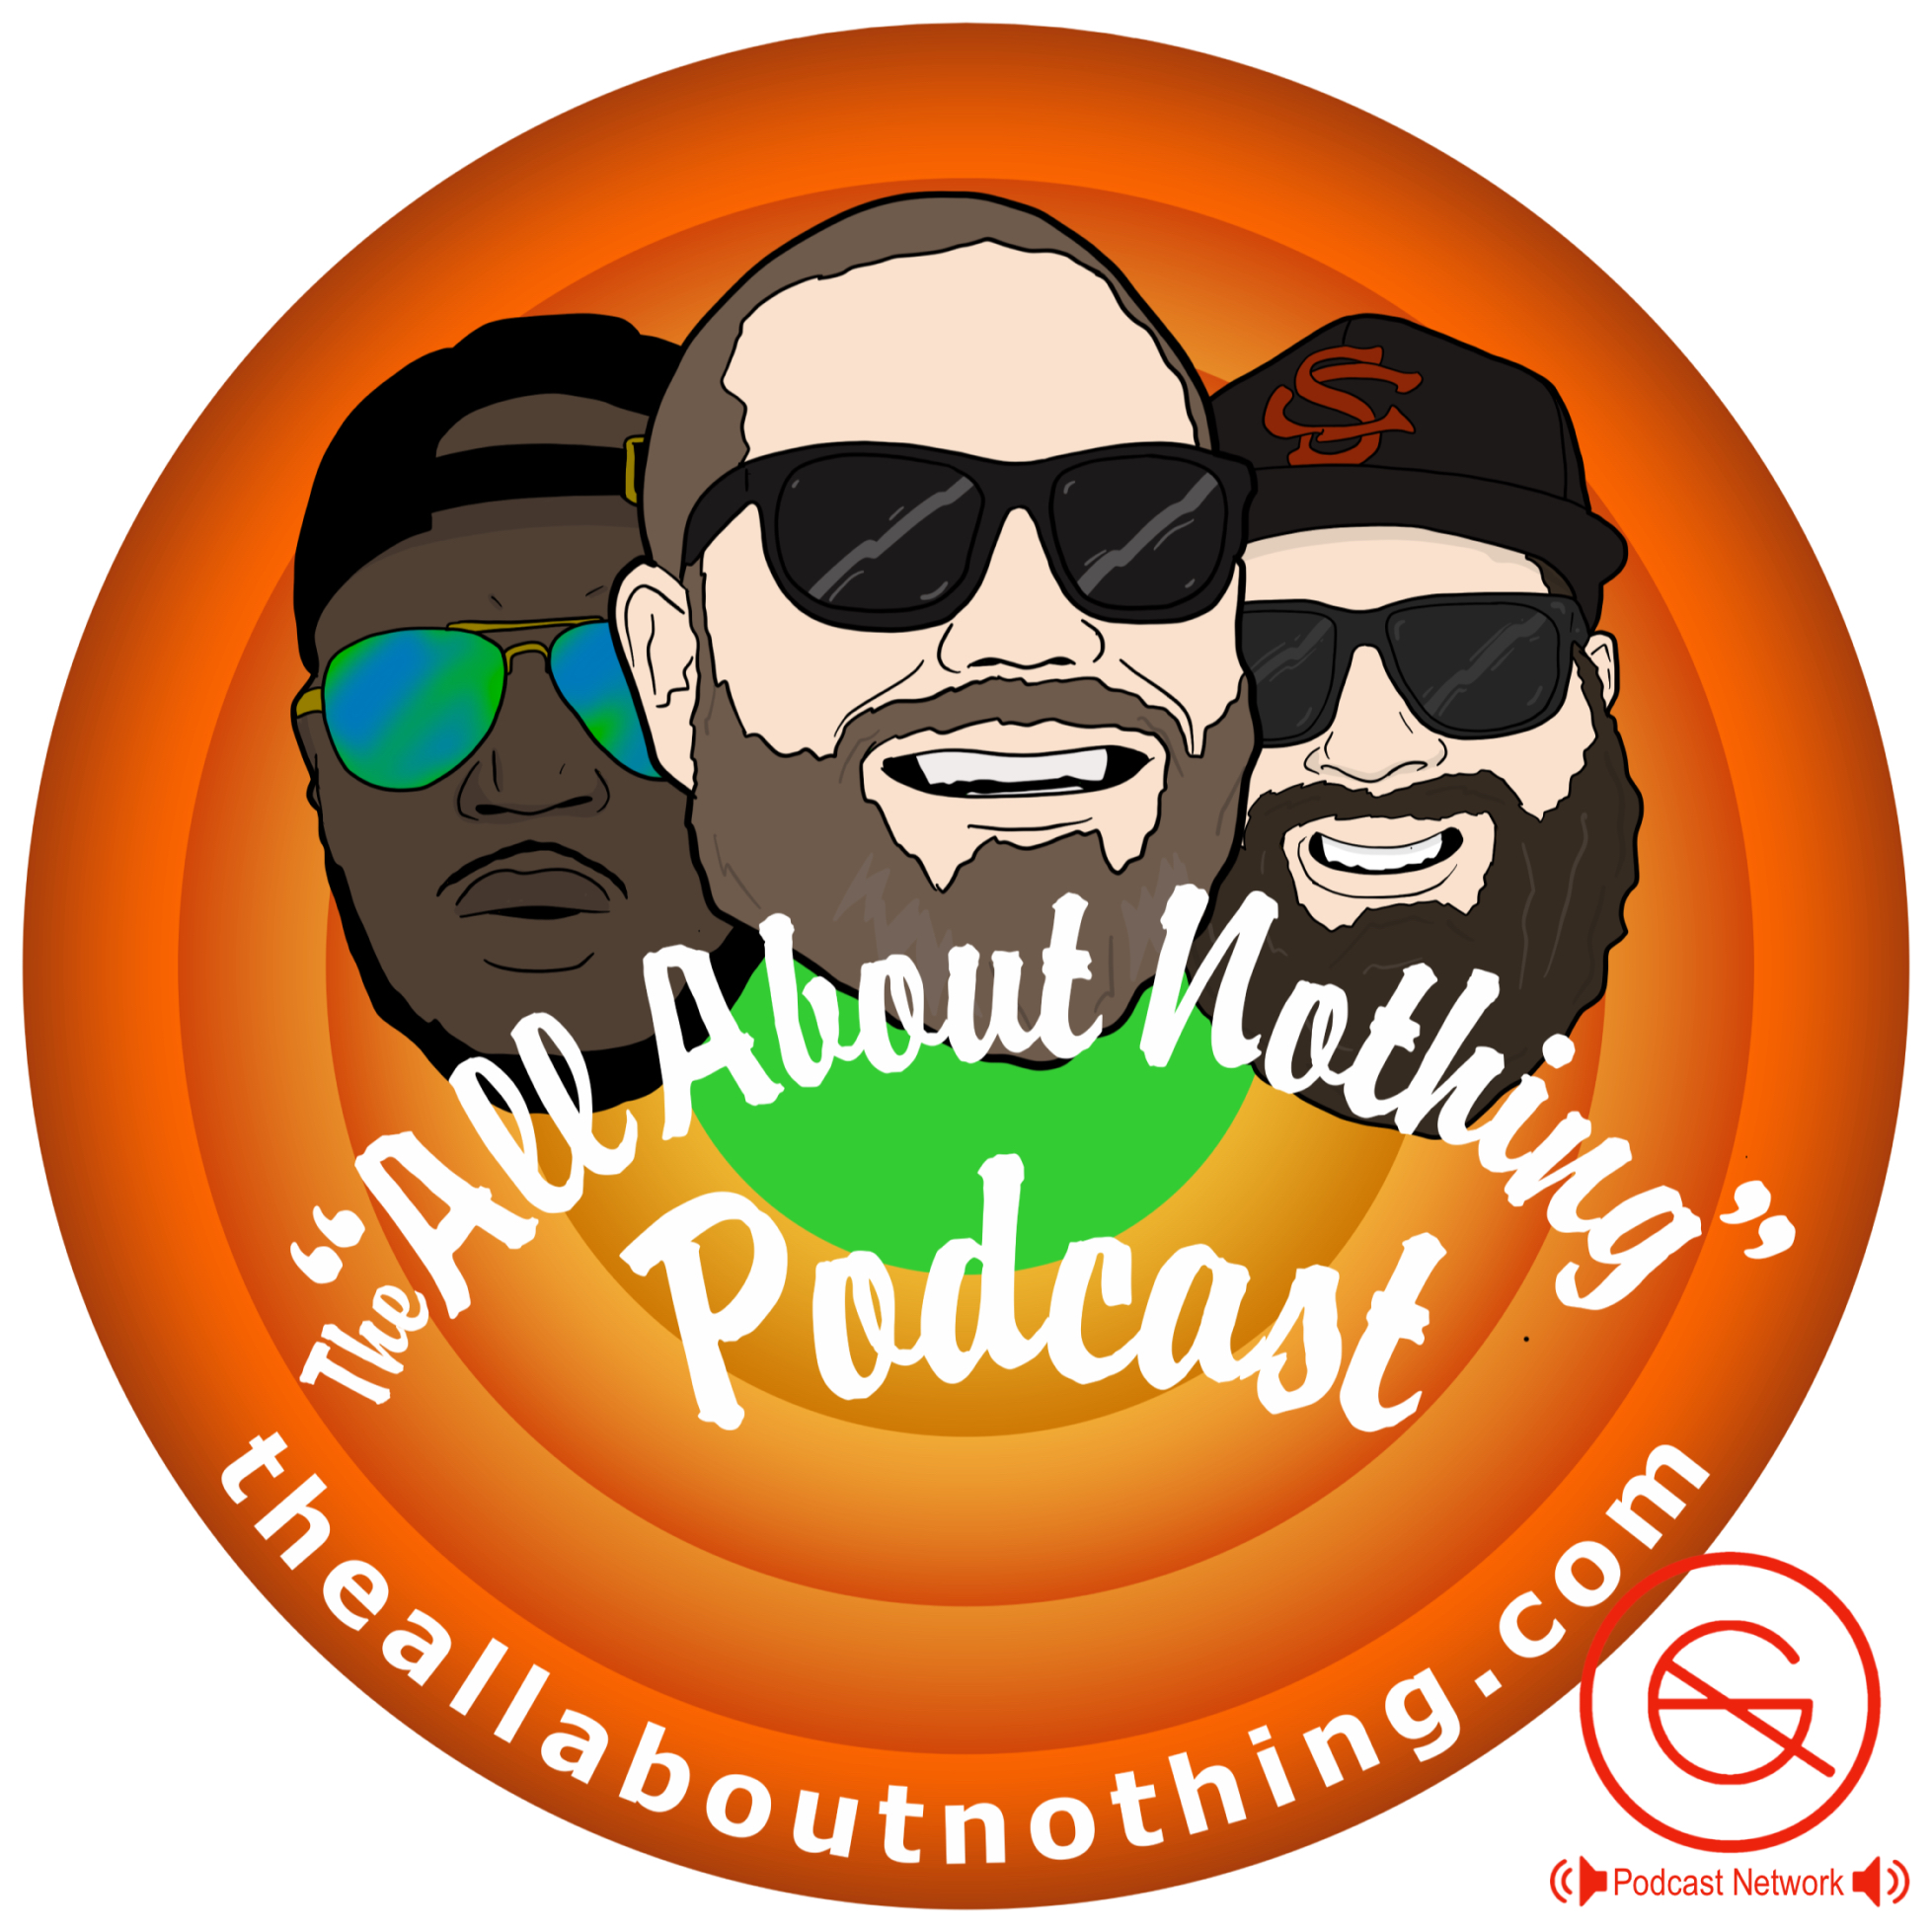 The All About Nothing: Podcast's artwork